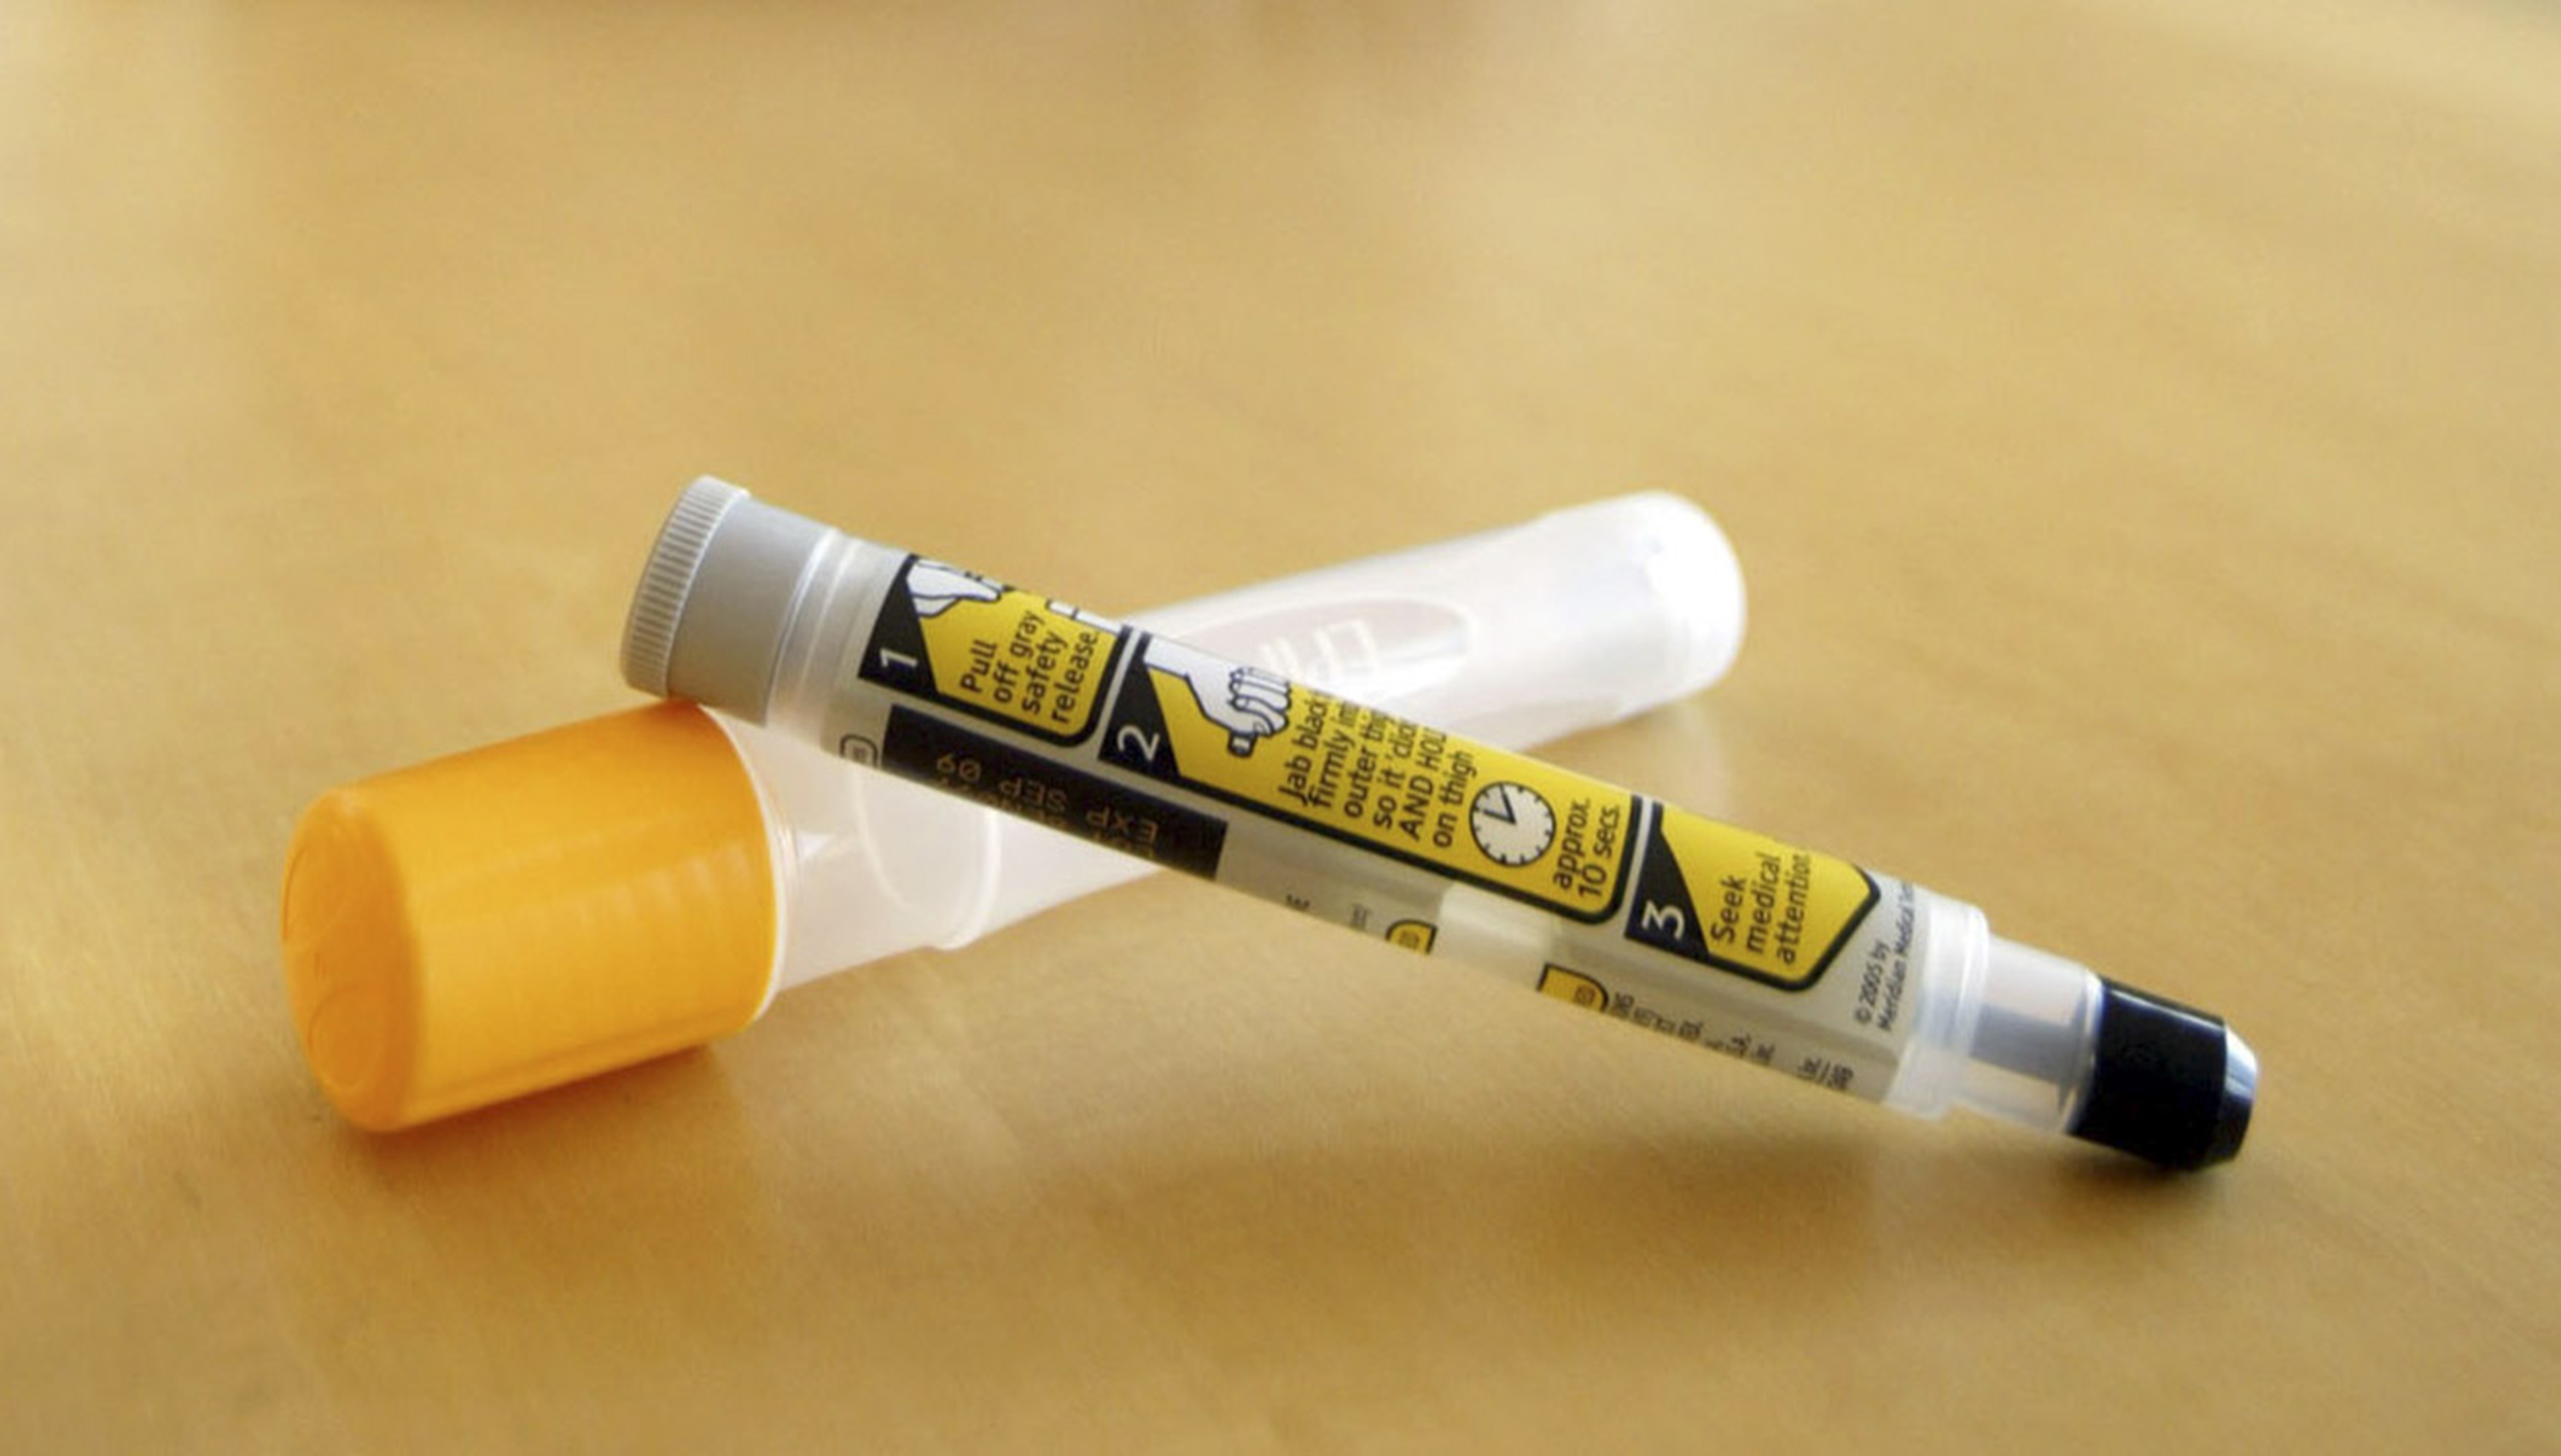 An EpiPen, used to treat anaphylactic shock. (Anda Chu—Getty Images)